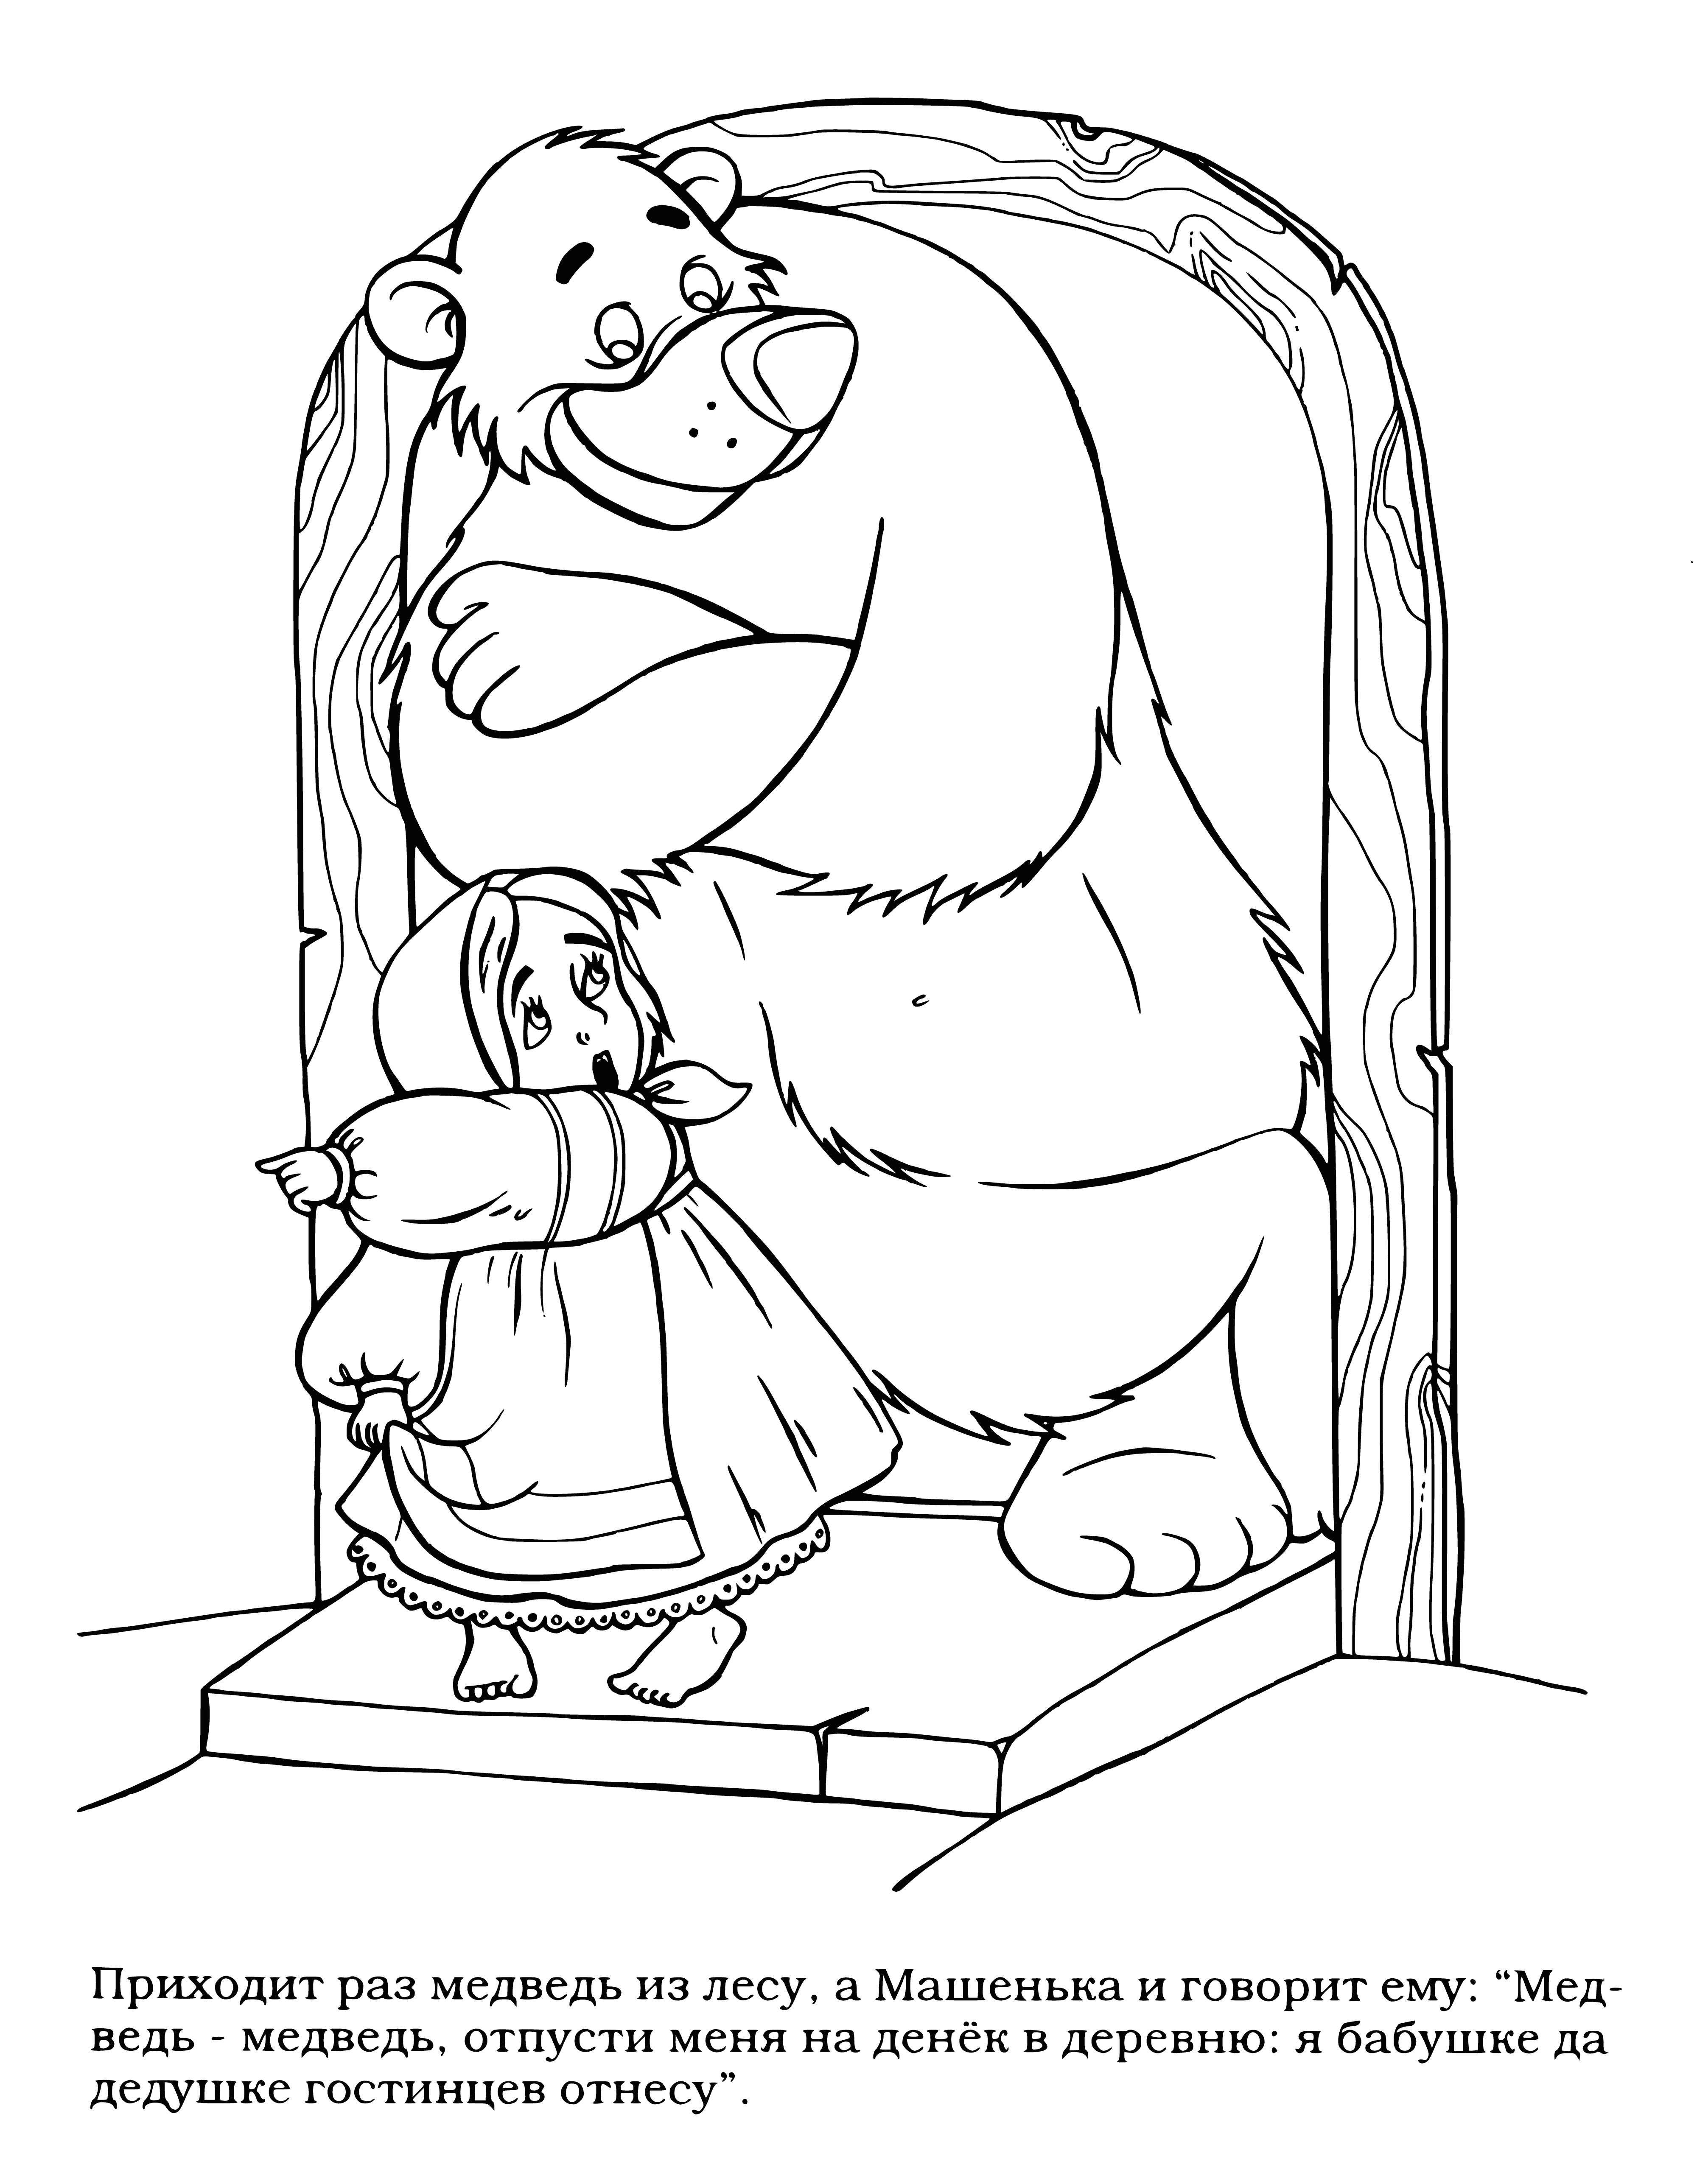 coloring page: Girl meets bear, is scared at first, but negotiates her way out of danger and the two become friends and live in the forest together. #MashaAndTheBear